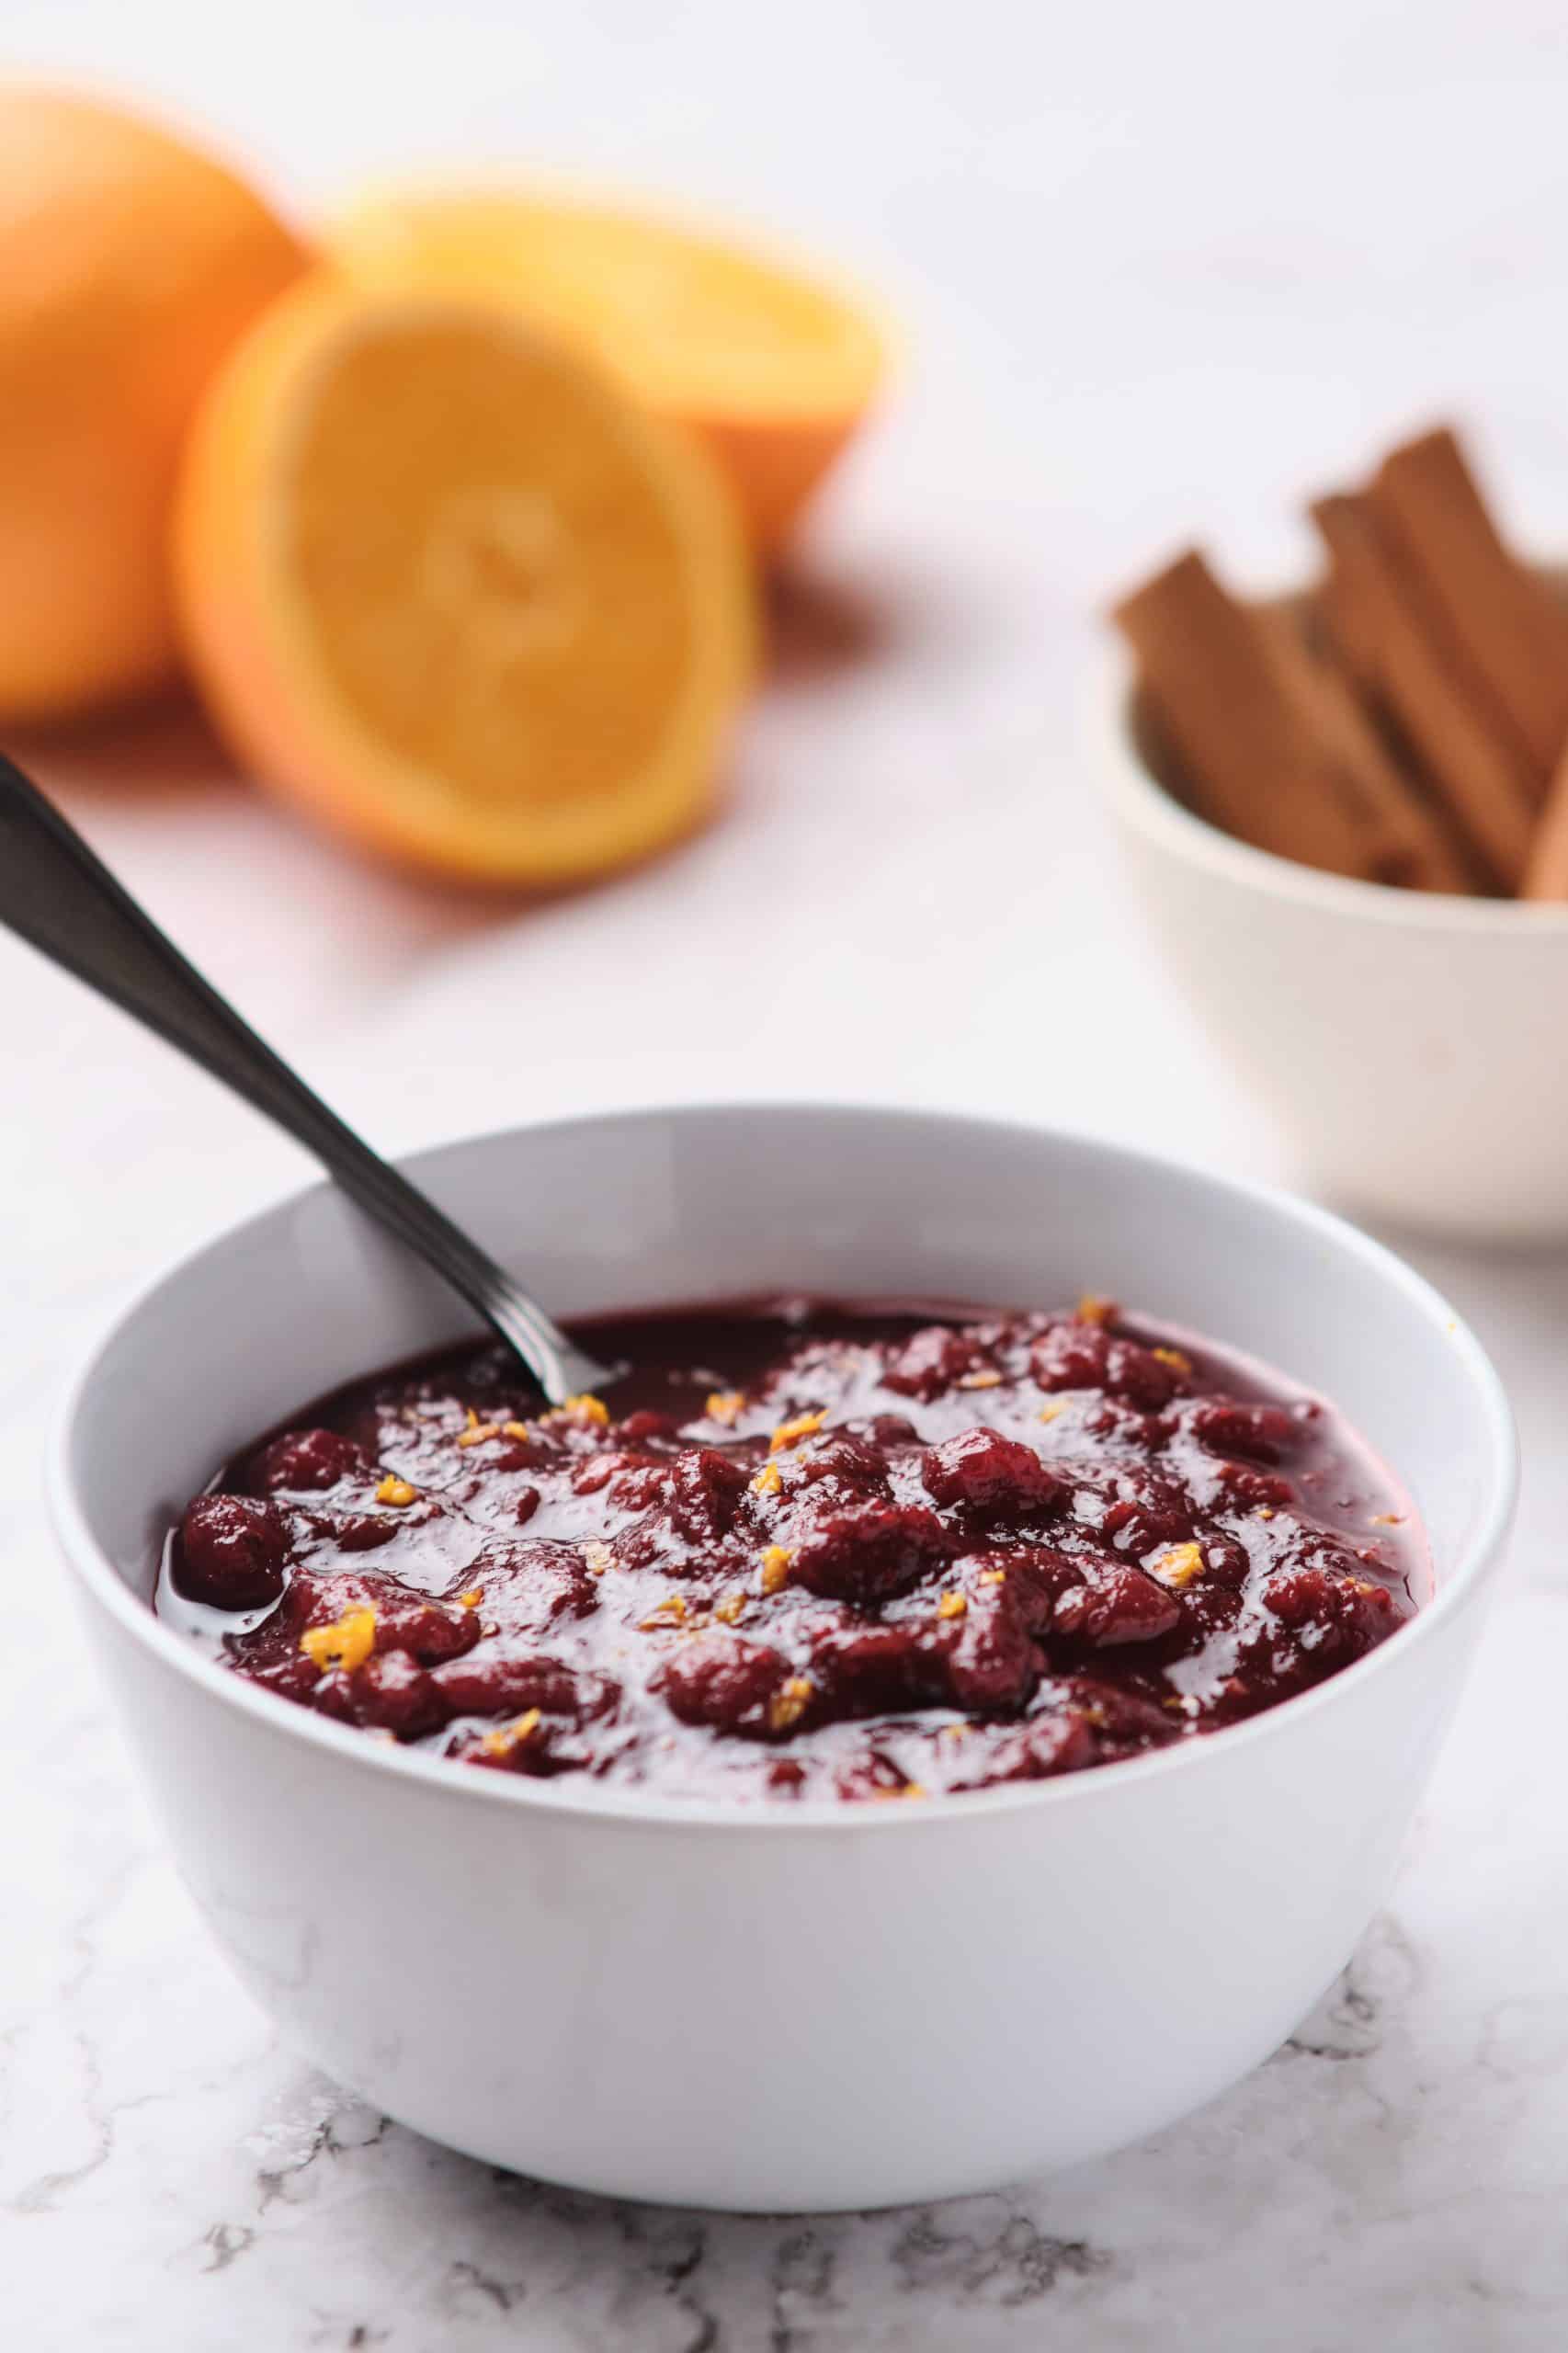 bowl of cranberry sauce on a table with spices and oranges